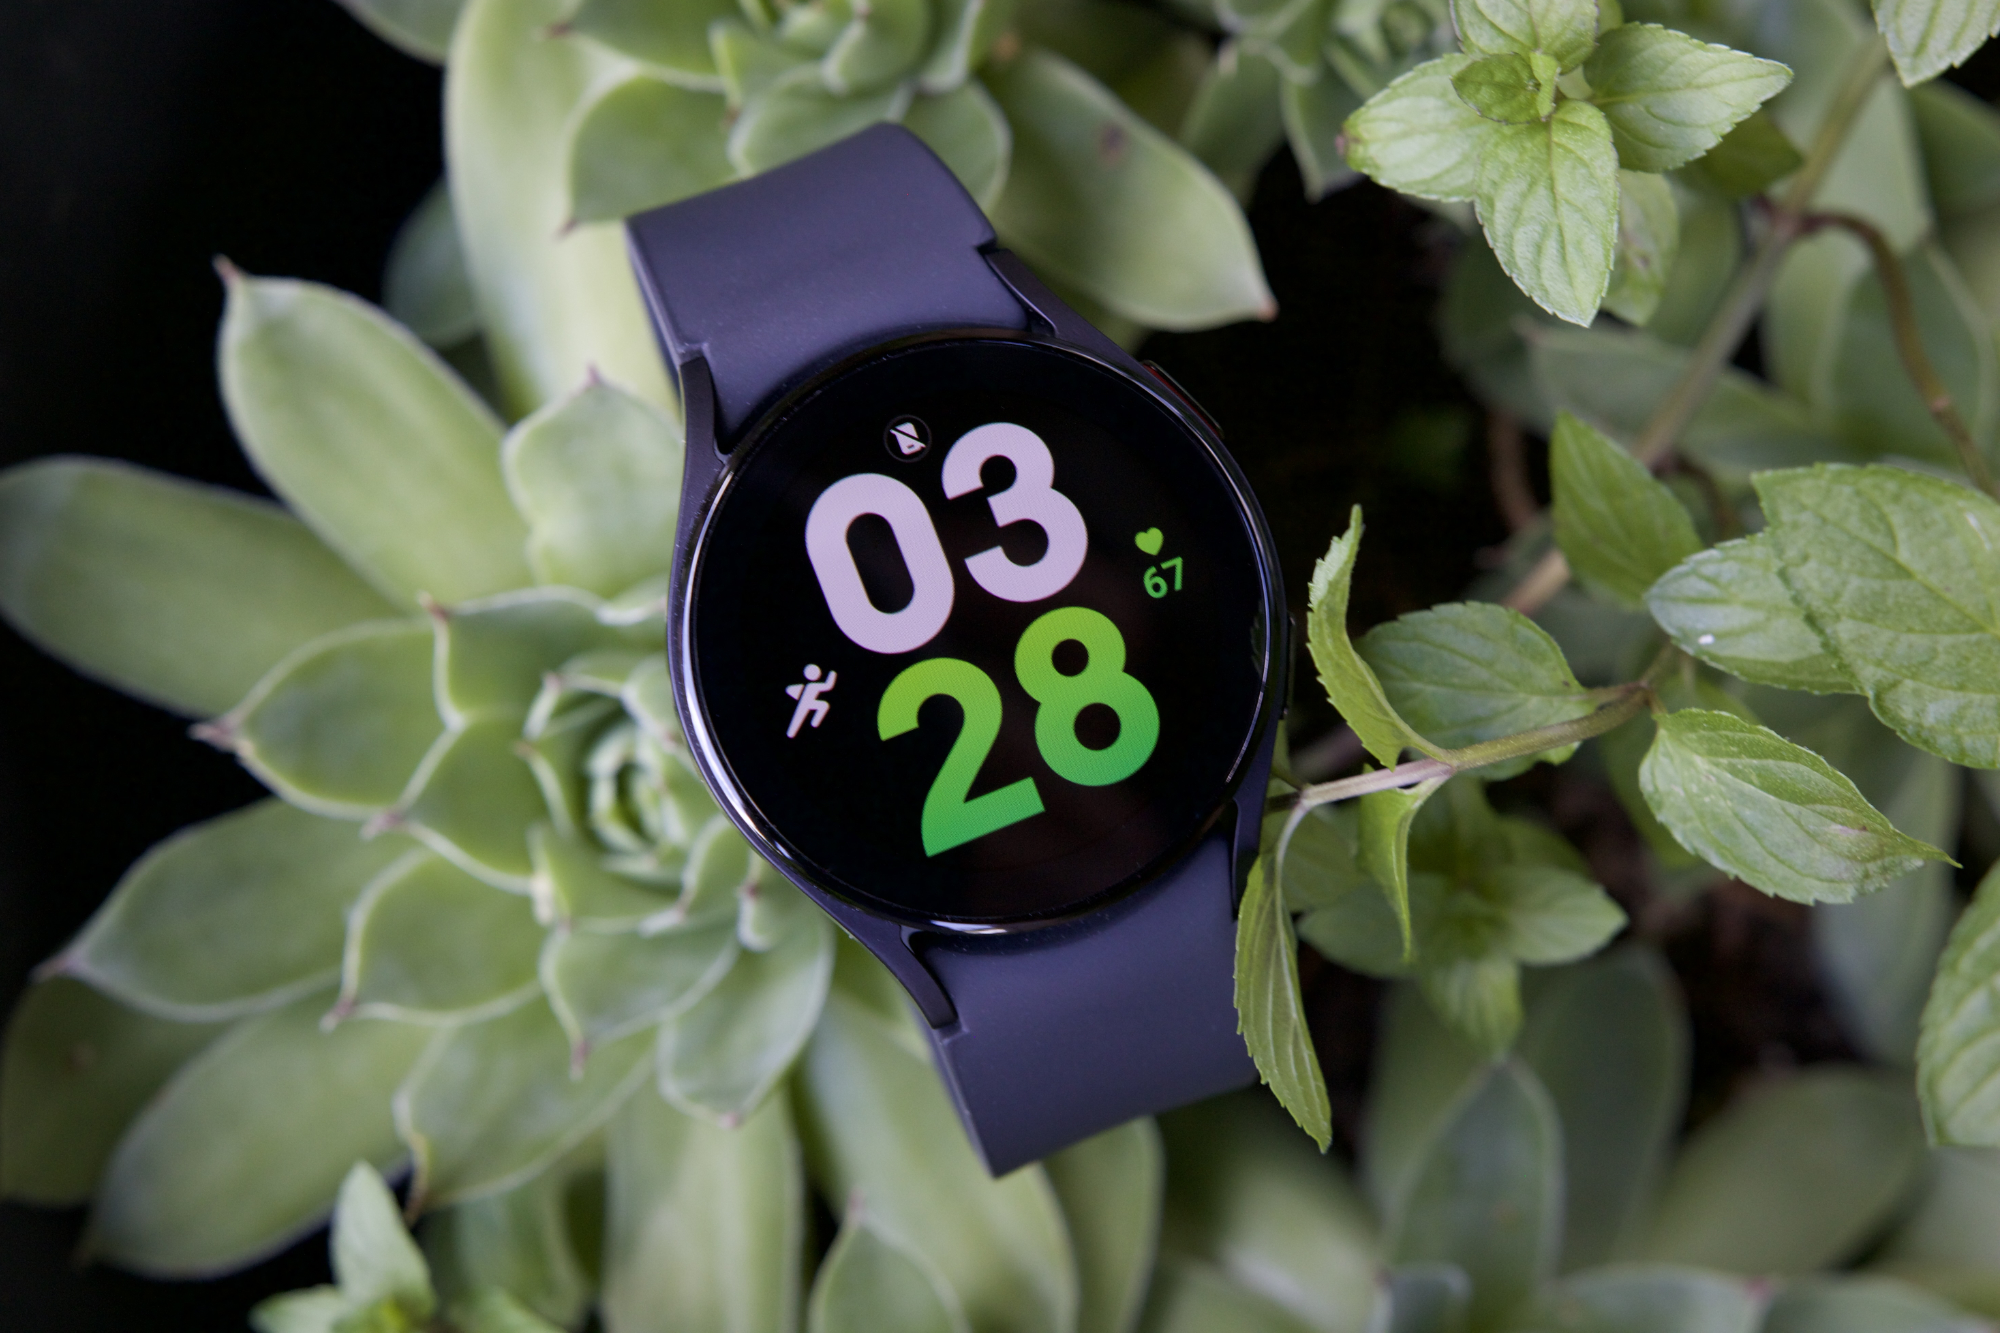 Samsung Galaxy Watch 5 review: peak of Android smartwatches | Digital Trends